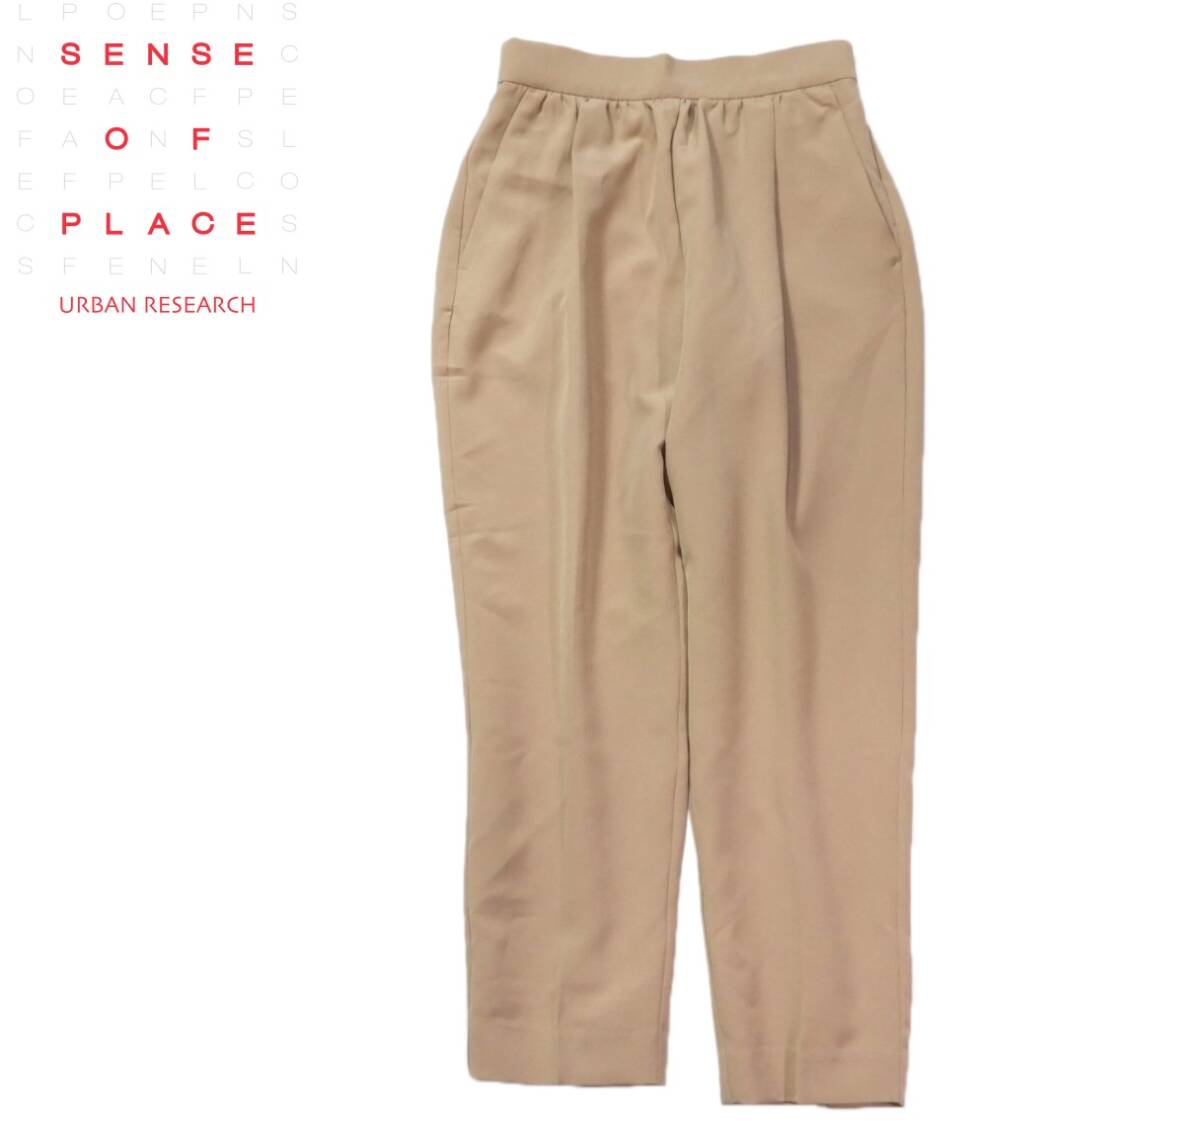  unused Urban Research sense ob Play ssense of place adult wonderful * pull over tapered pants setup Free